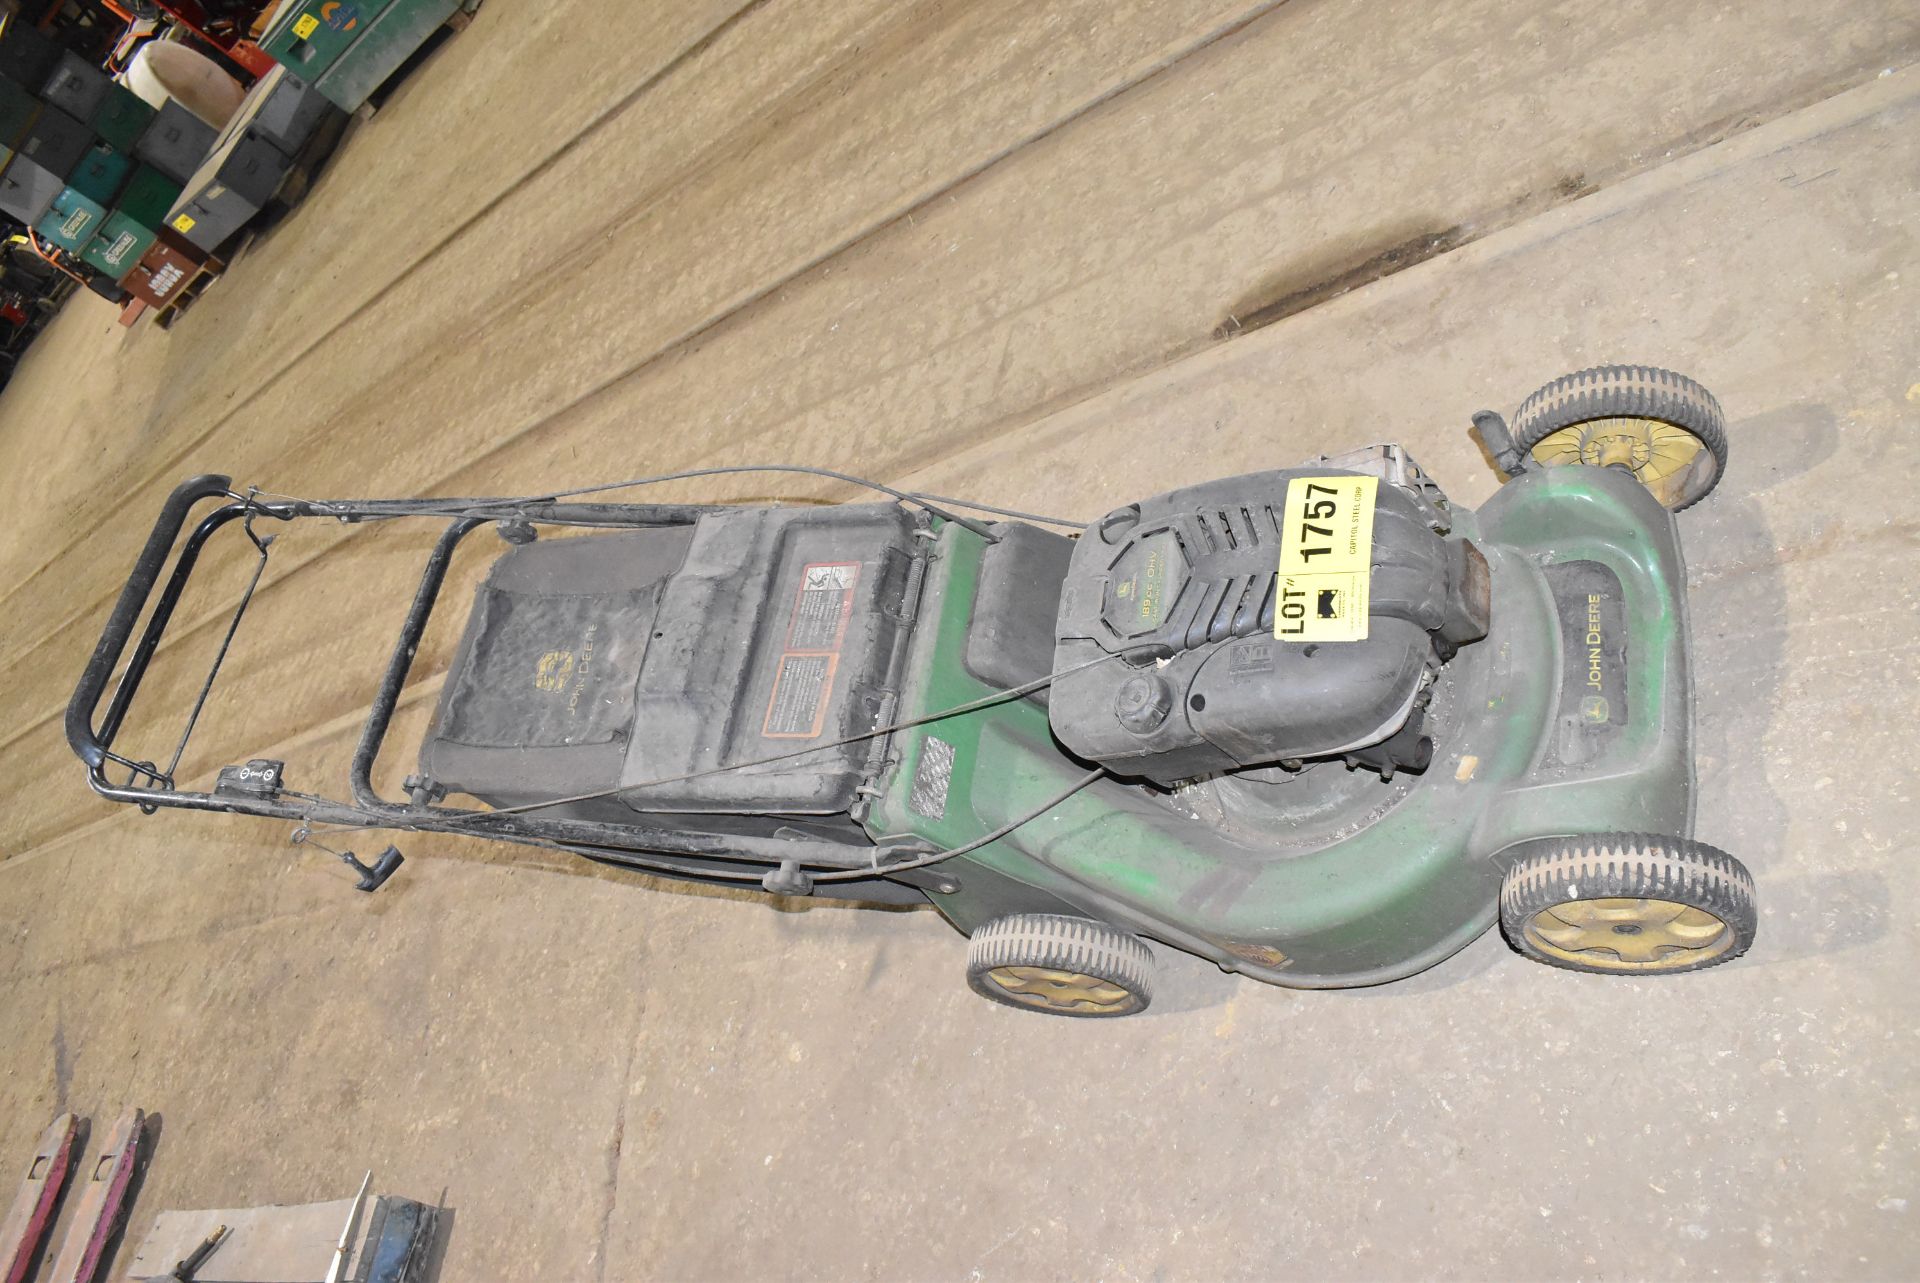 JOHN DEERE GAS POWERED LAWN MOWER [RIGGING FEES FOR LOT #1757 - $30 USD PLUS APPLICABLE TAXES]